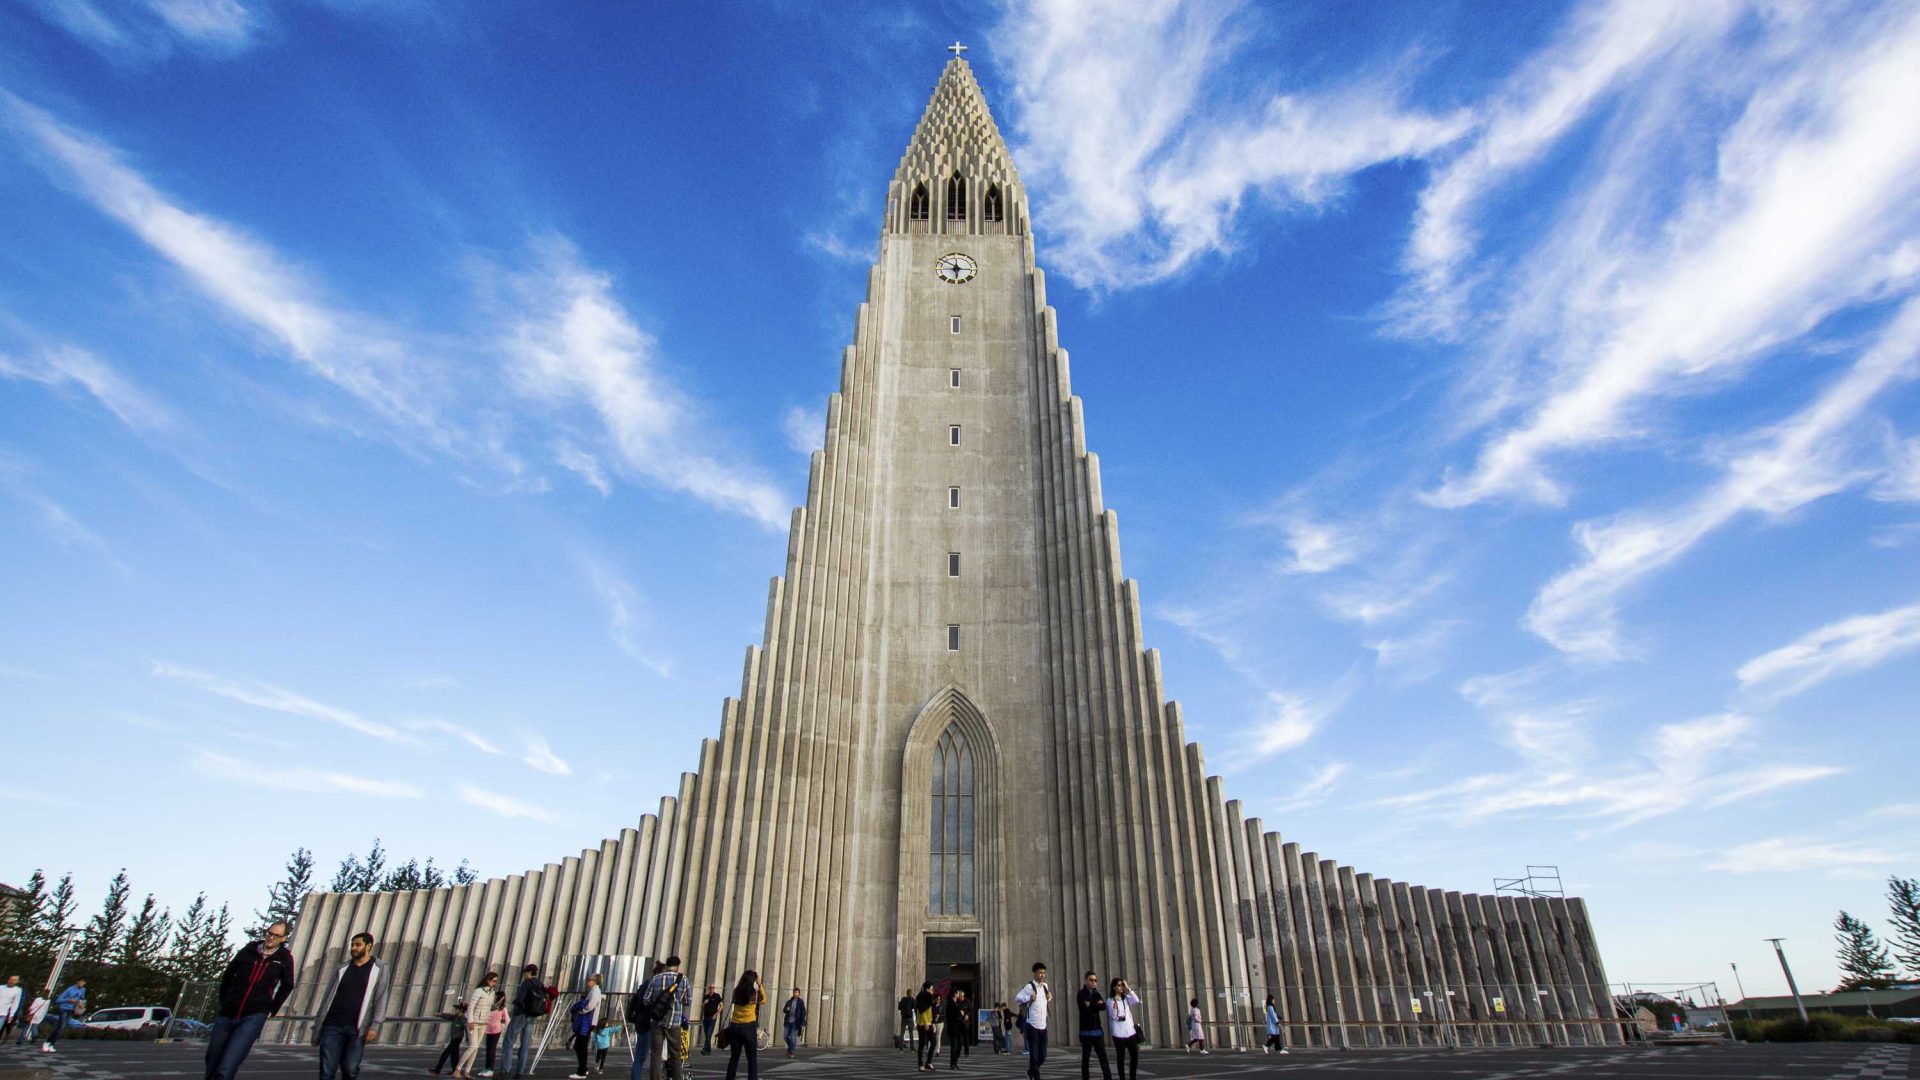 People stand at the base of Hallgrímskirkja, a tall Lutheran church.